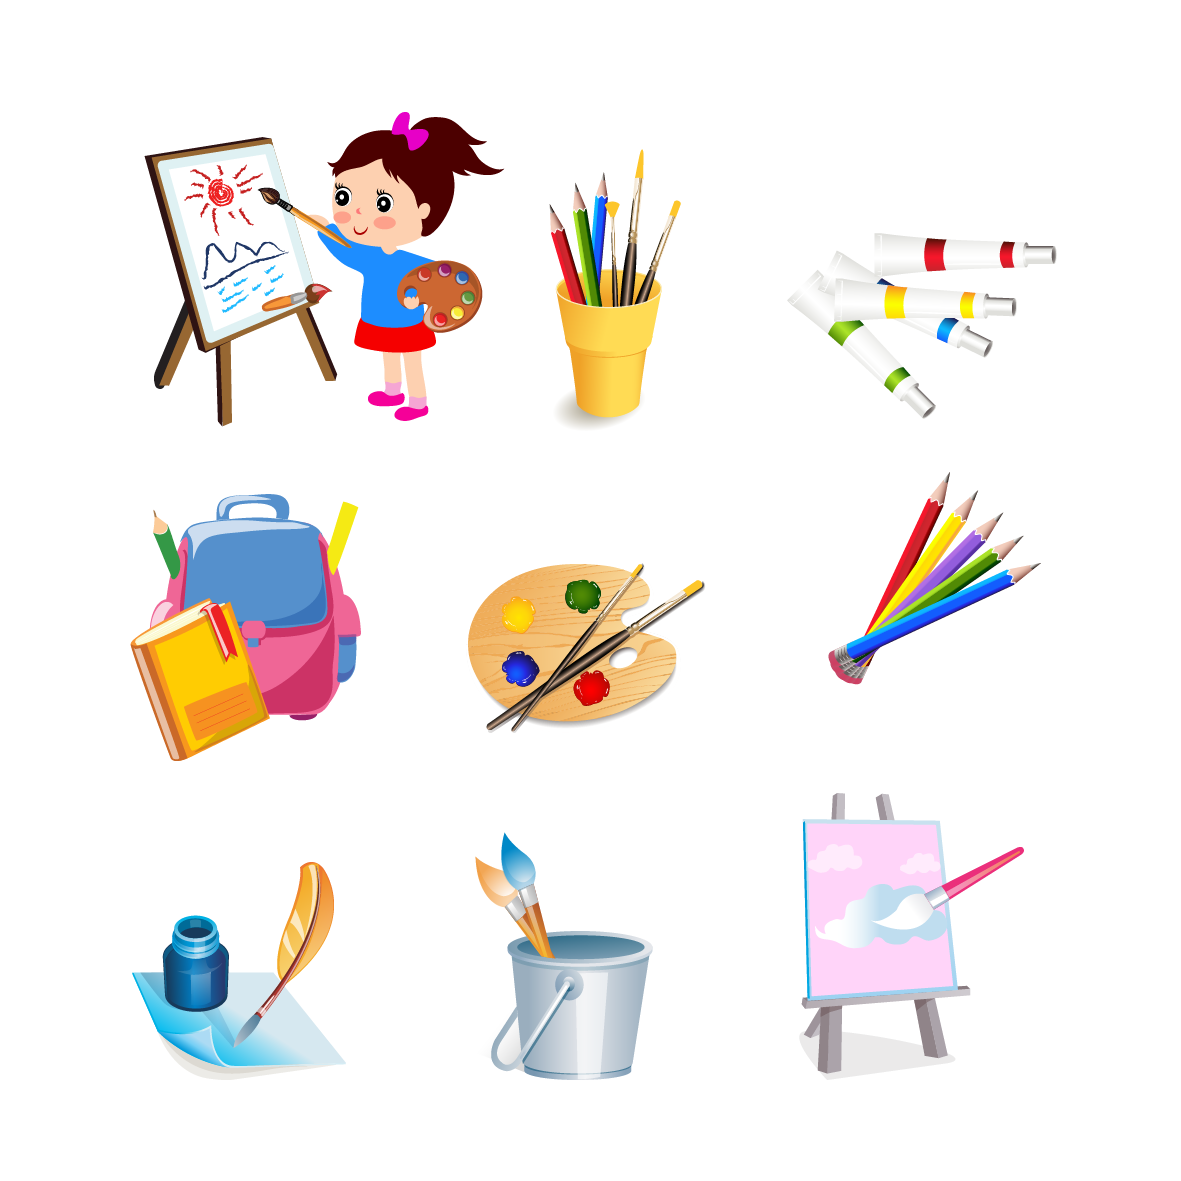 Tools clip art drawing. Working clipart yard tool